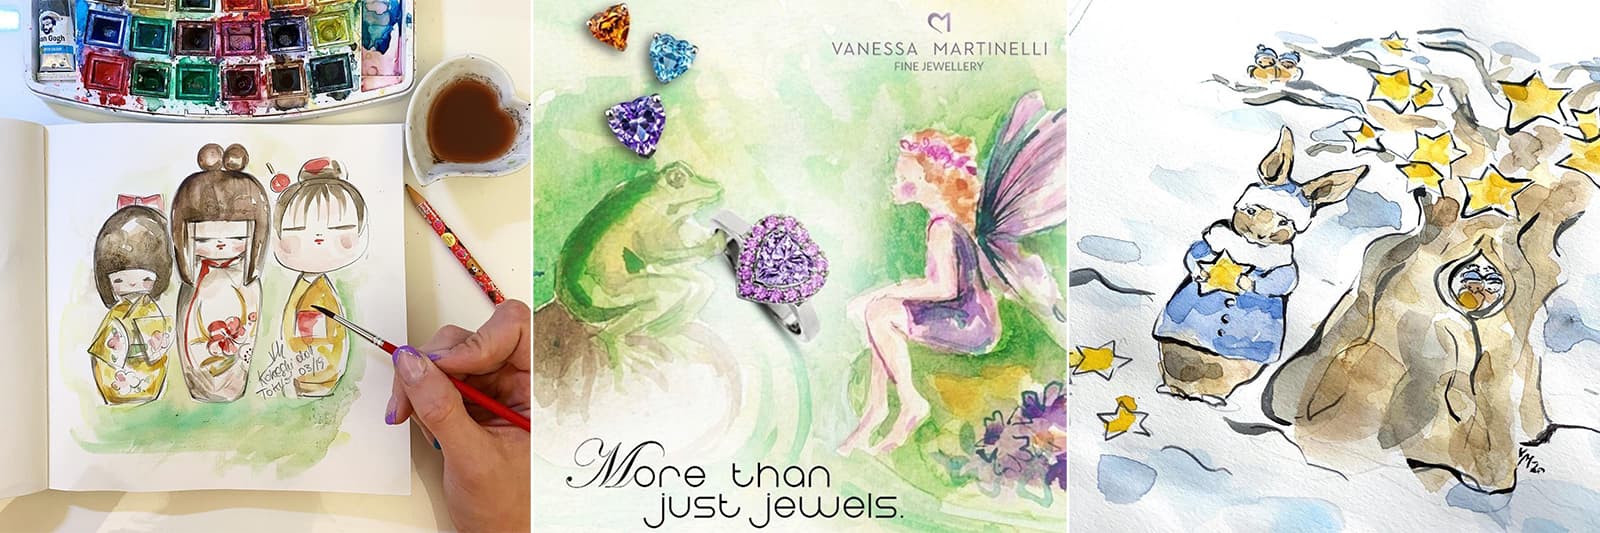 An artist at heart, Vanessa's adorable watercolours express the designer's unique positivity and joy for life